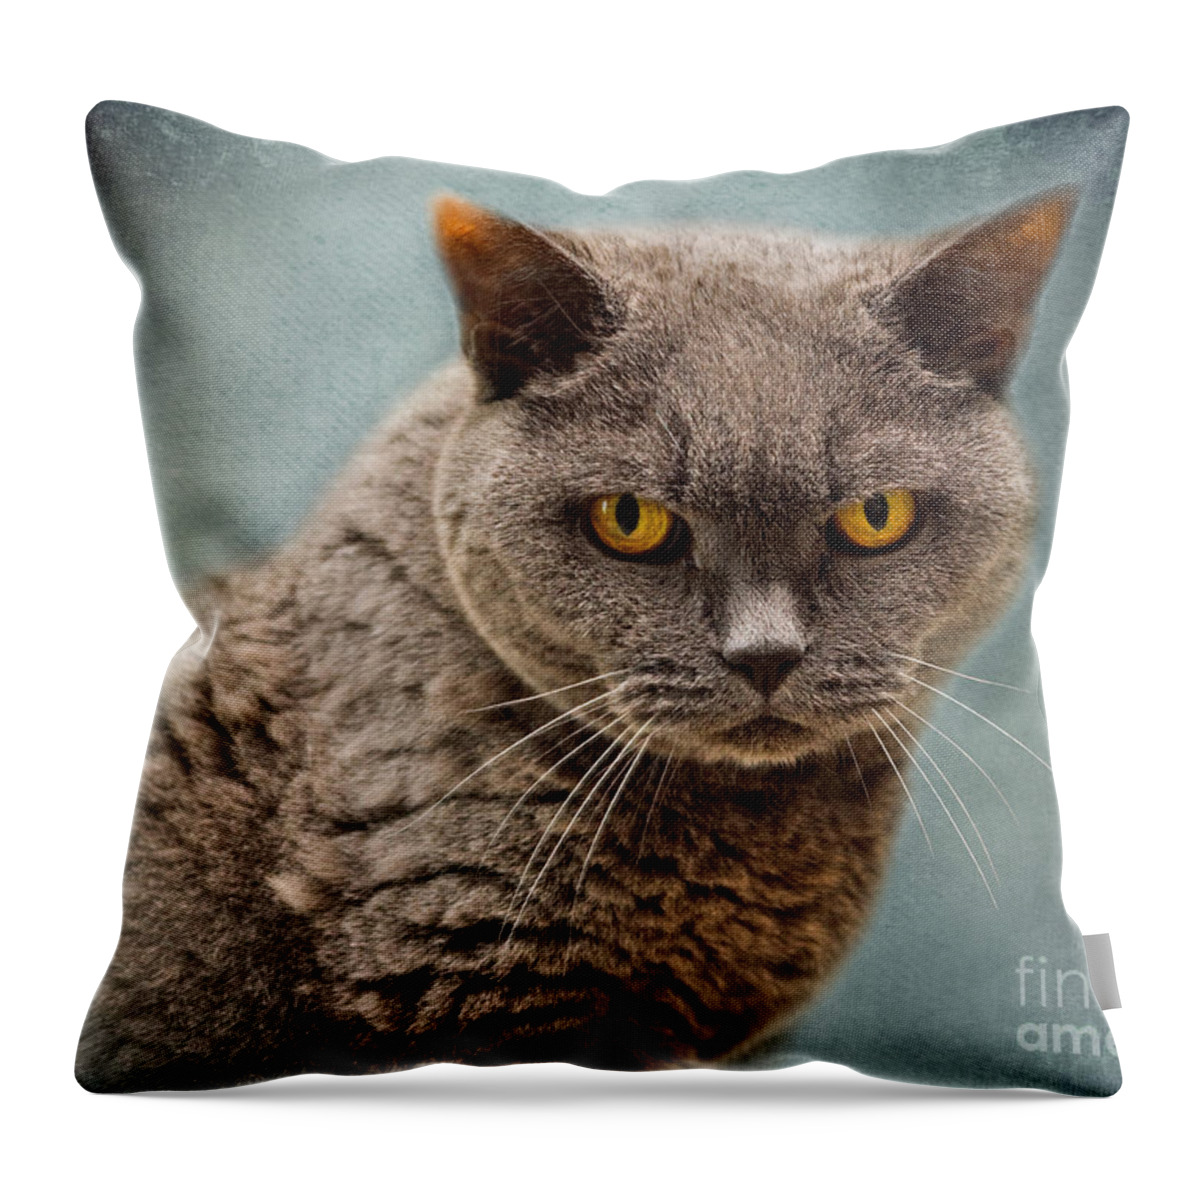 Cat Throw Pillow featuring the photograph British Blue Shorthaired Cat by Louise Heusinkveld